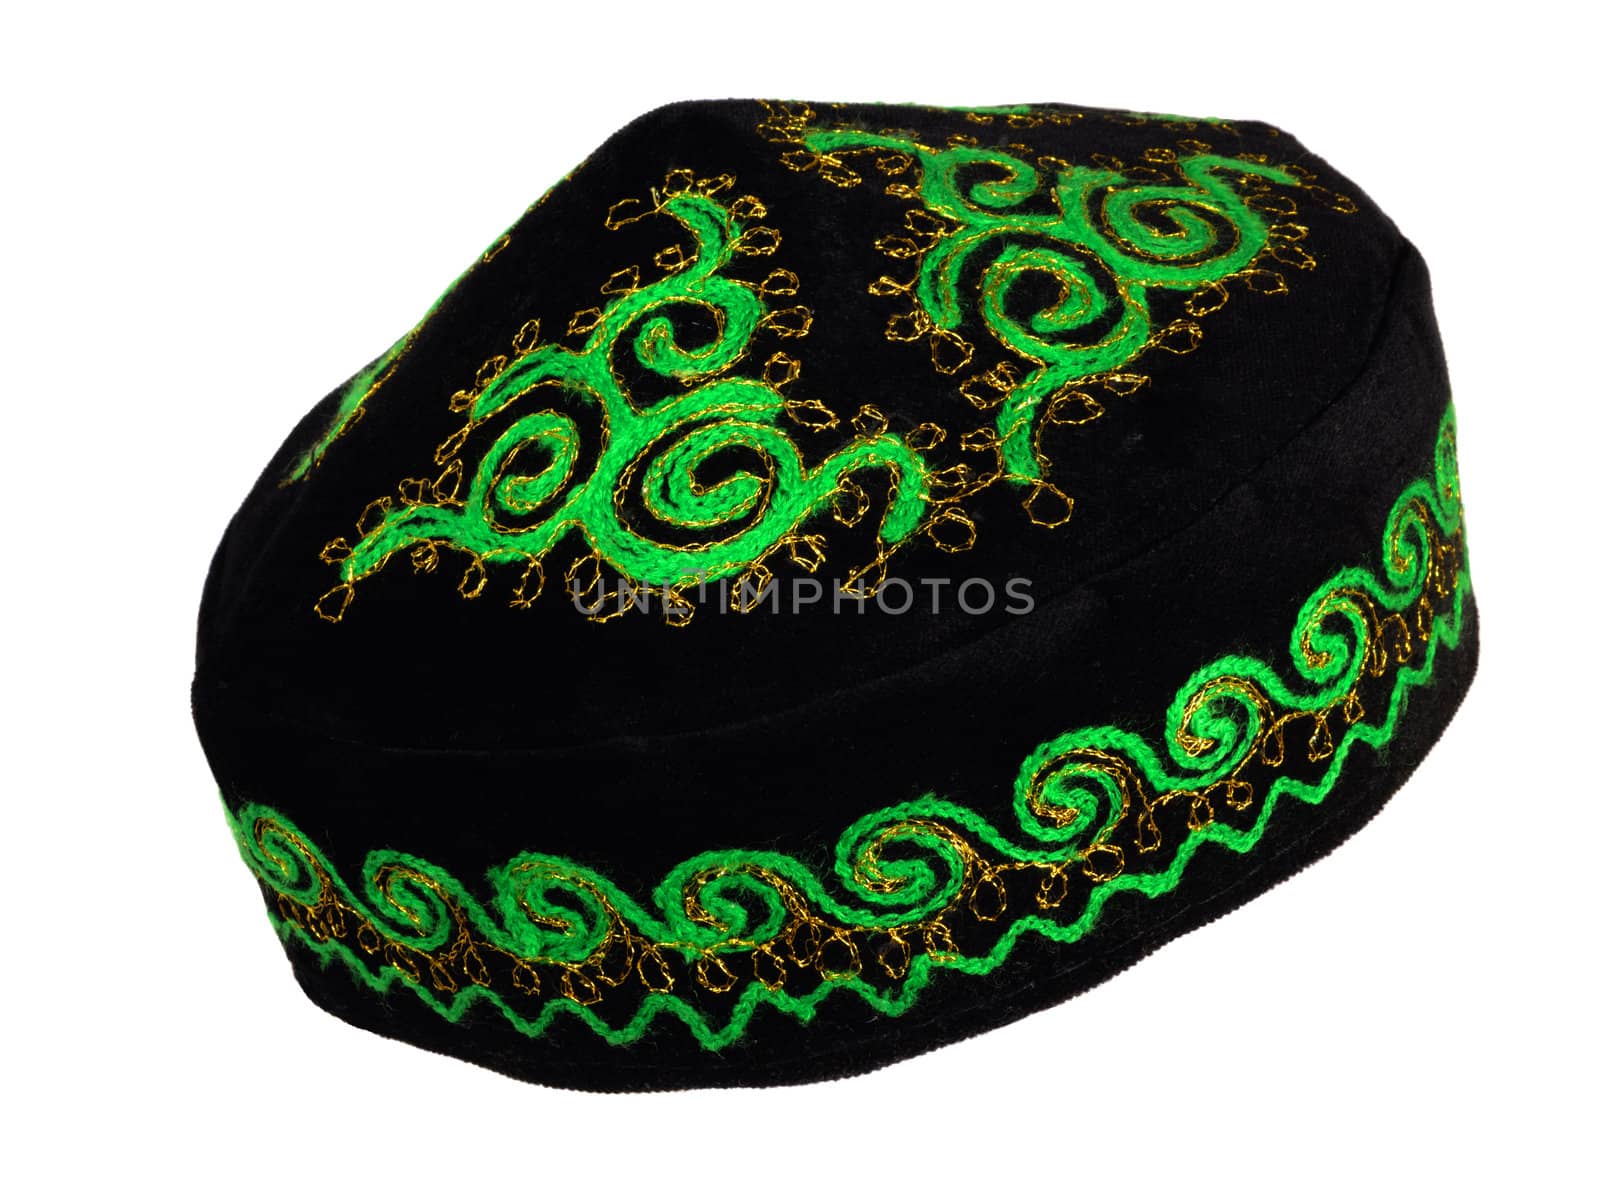 Tubeteika ( Skullcap ) - a popular headgear in the countries of Central Asia. On photo - Mongolian skullcap. Green and gold embroidery symbolizes prosperity and fertility of cattle 